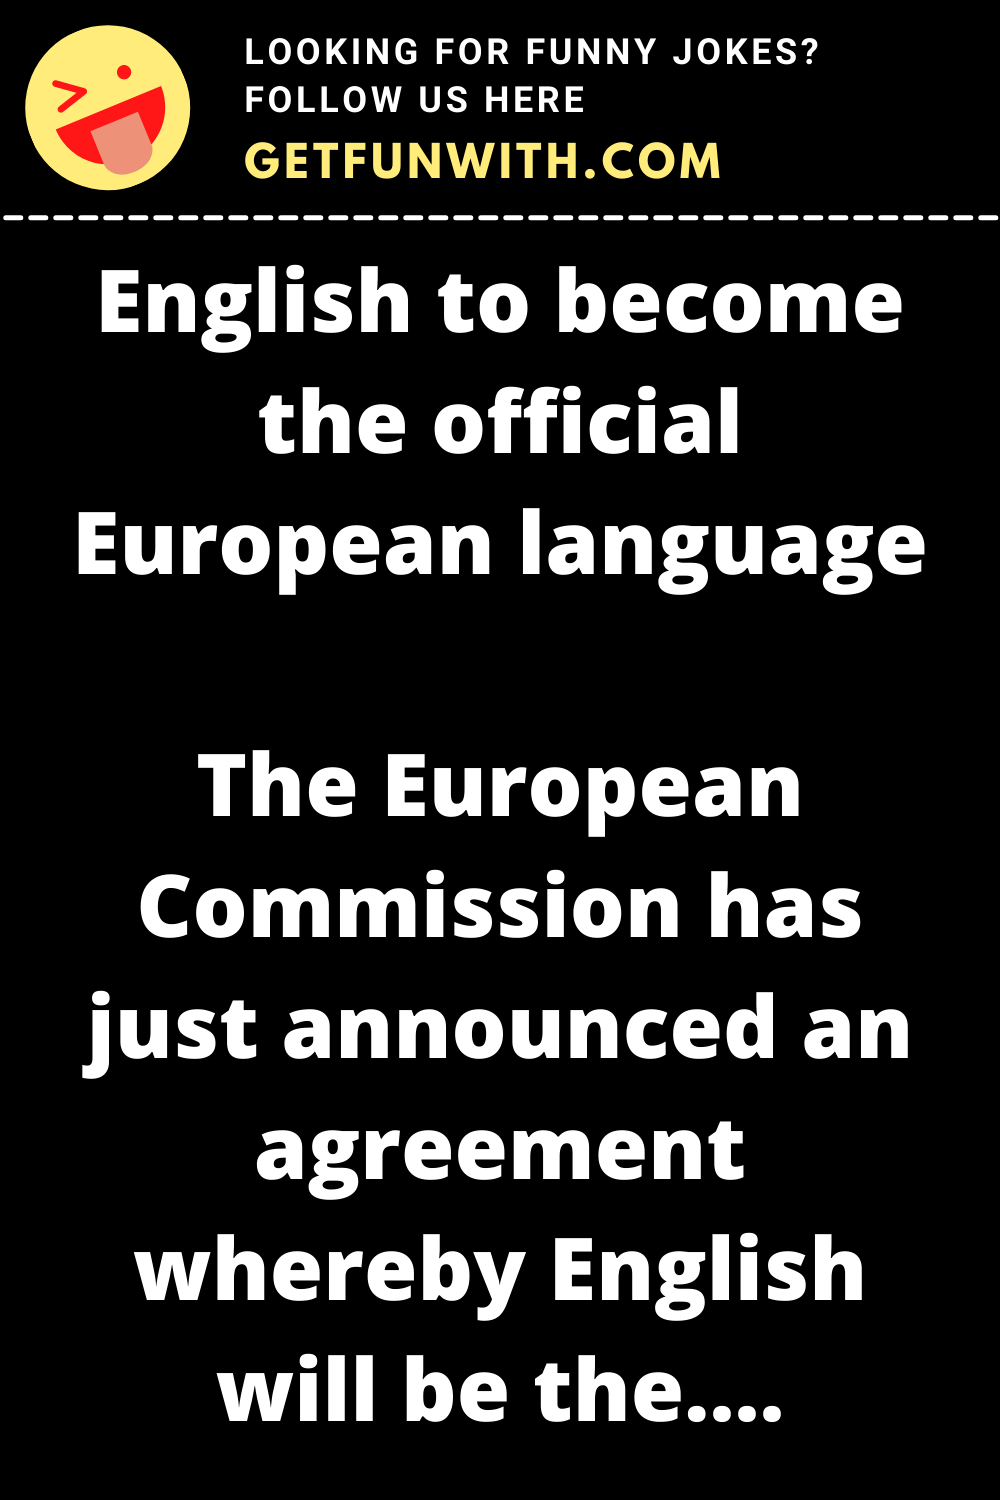 English to become the official European language